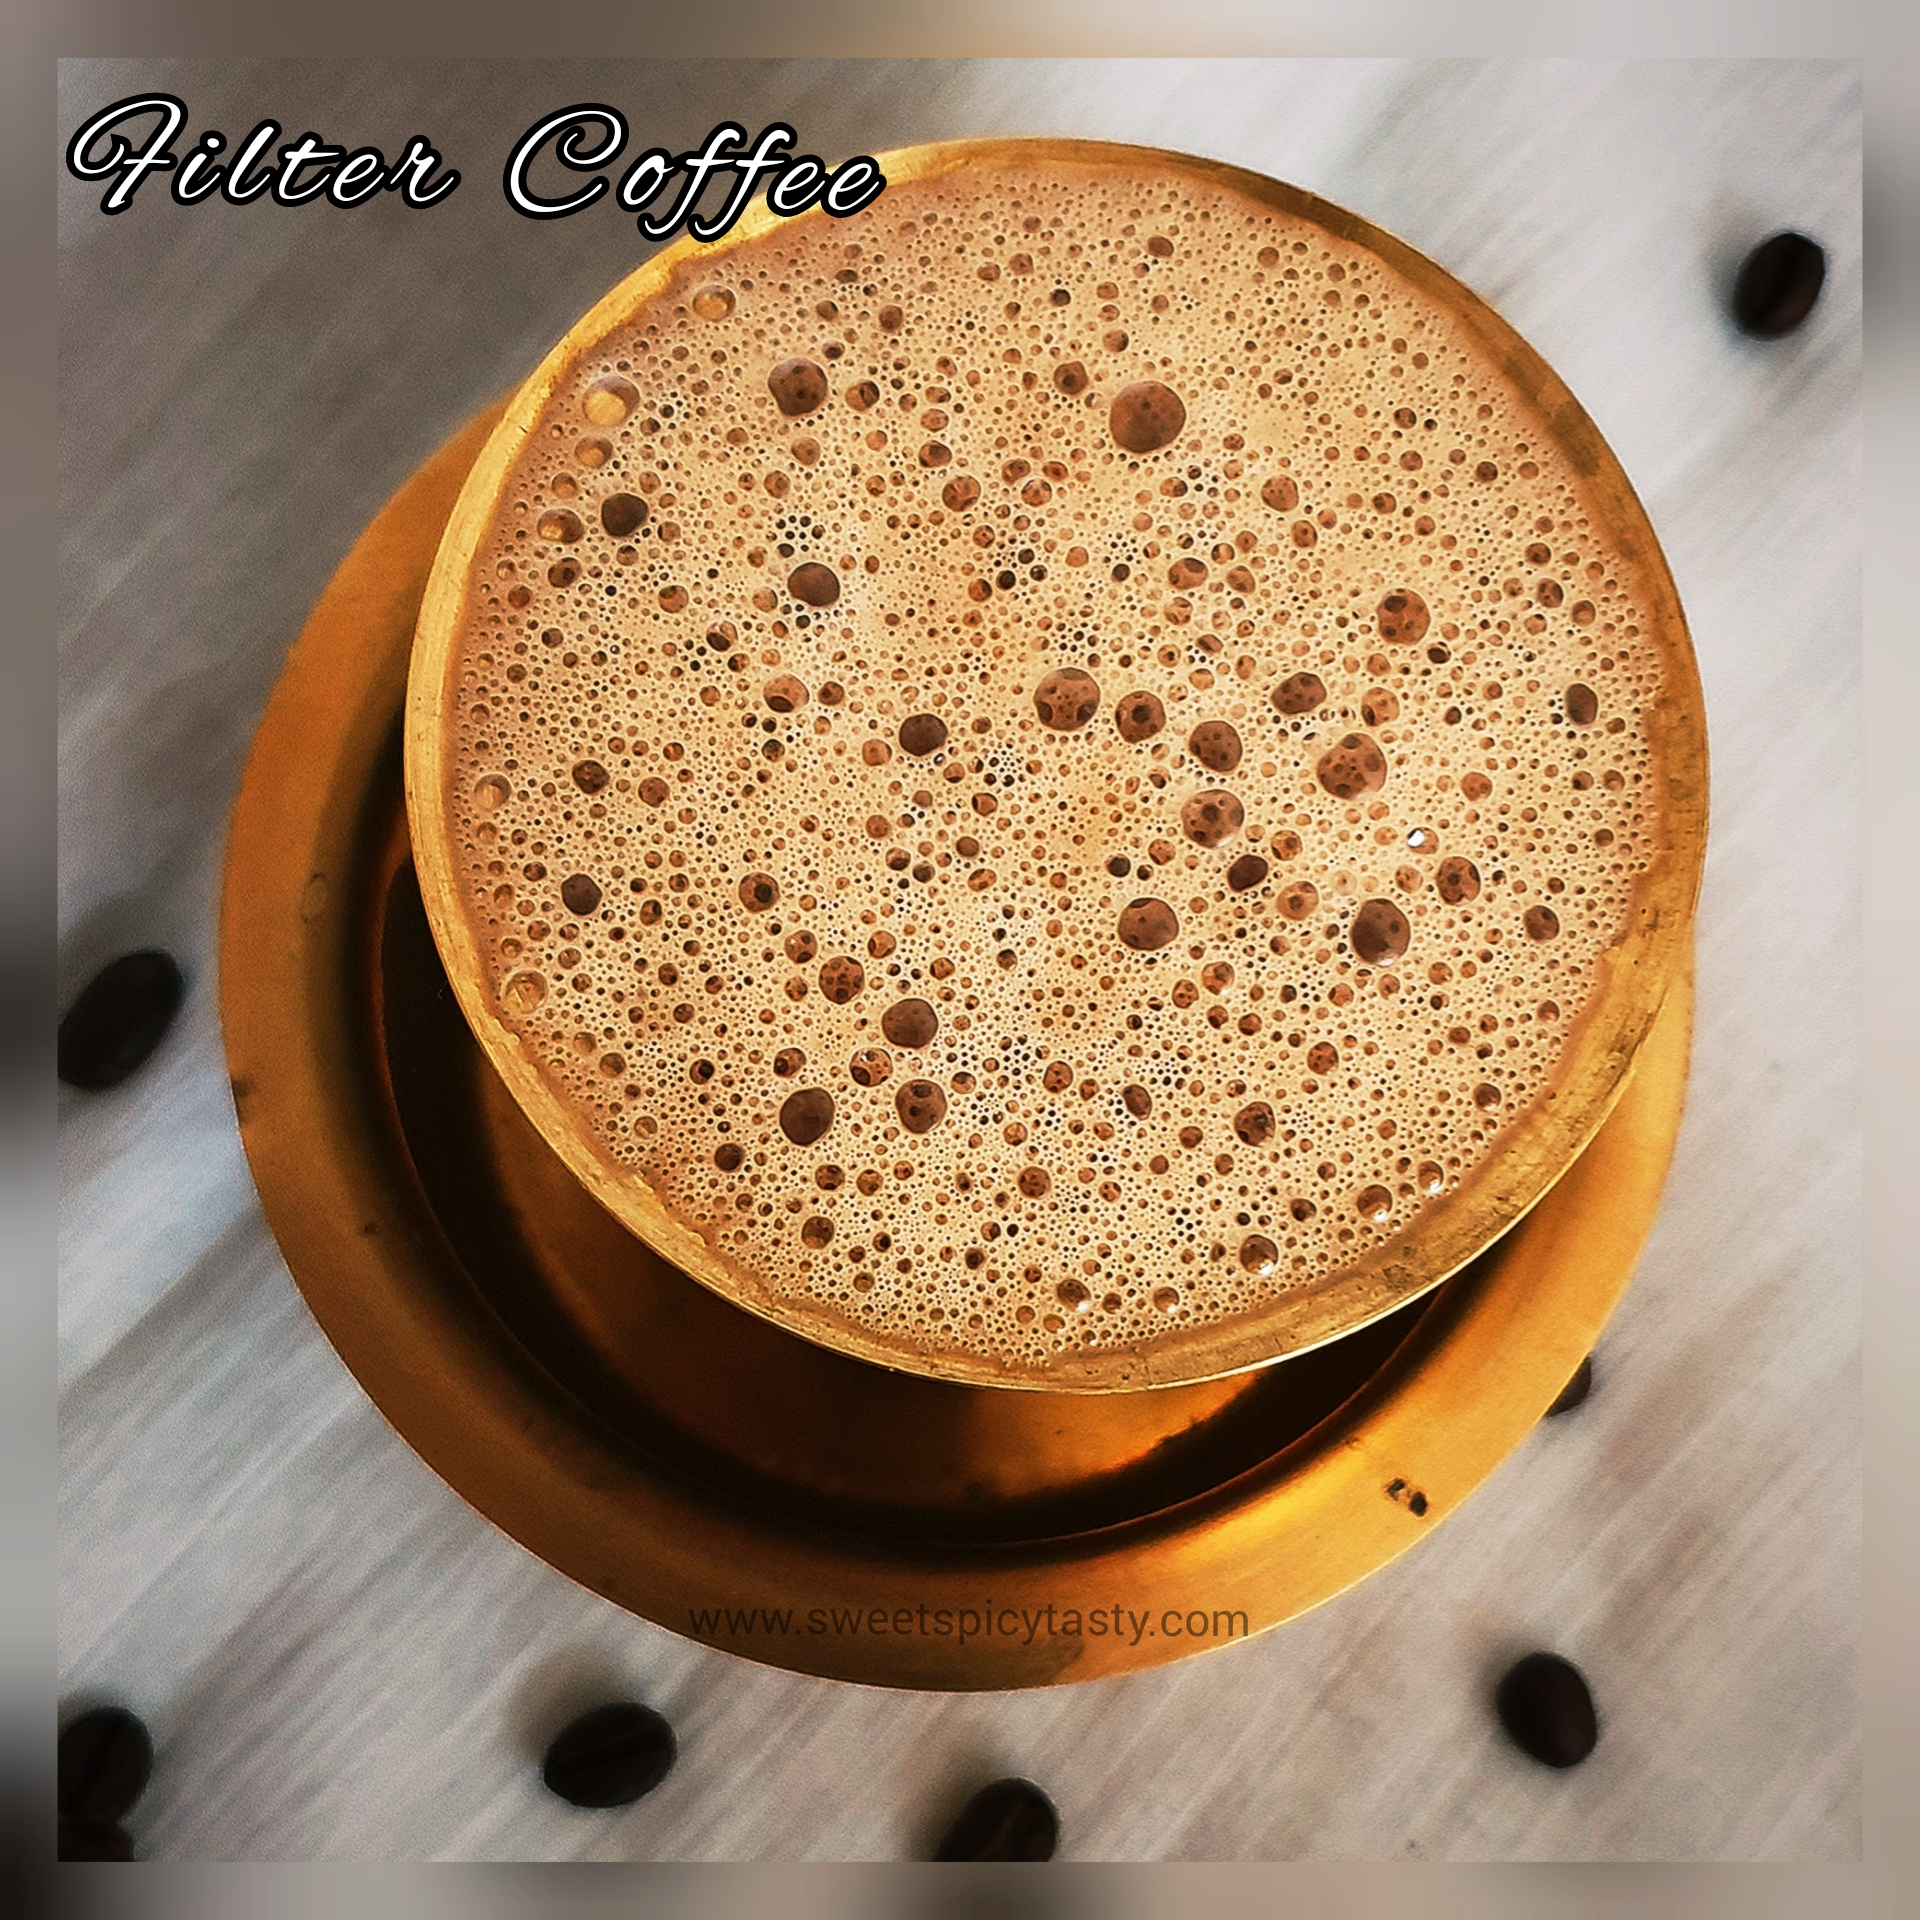 South indian filter coffee : r/CoffeePH